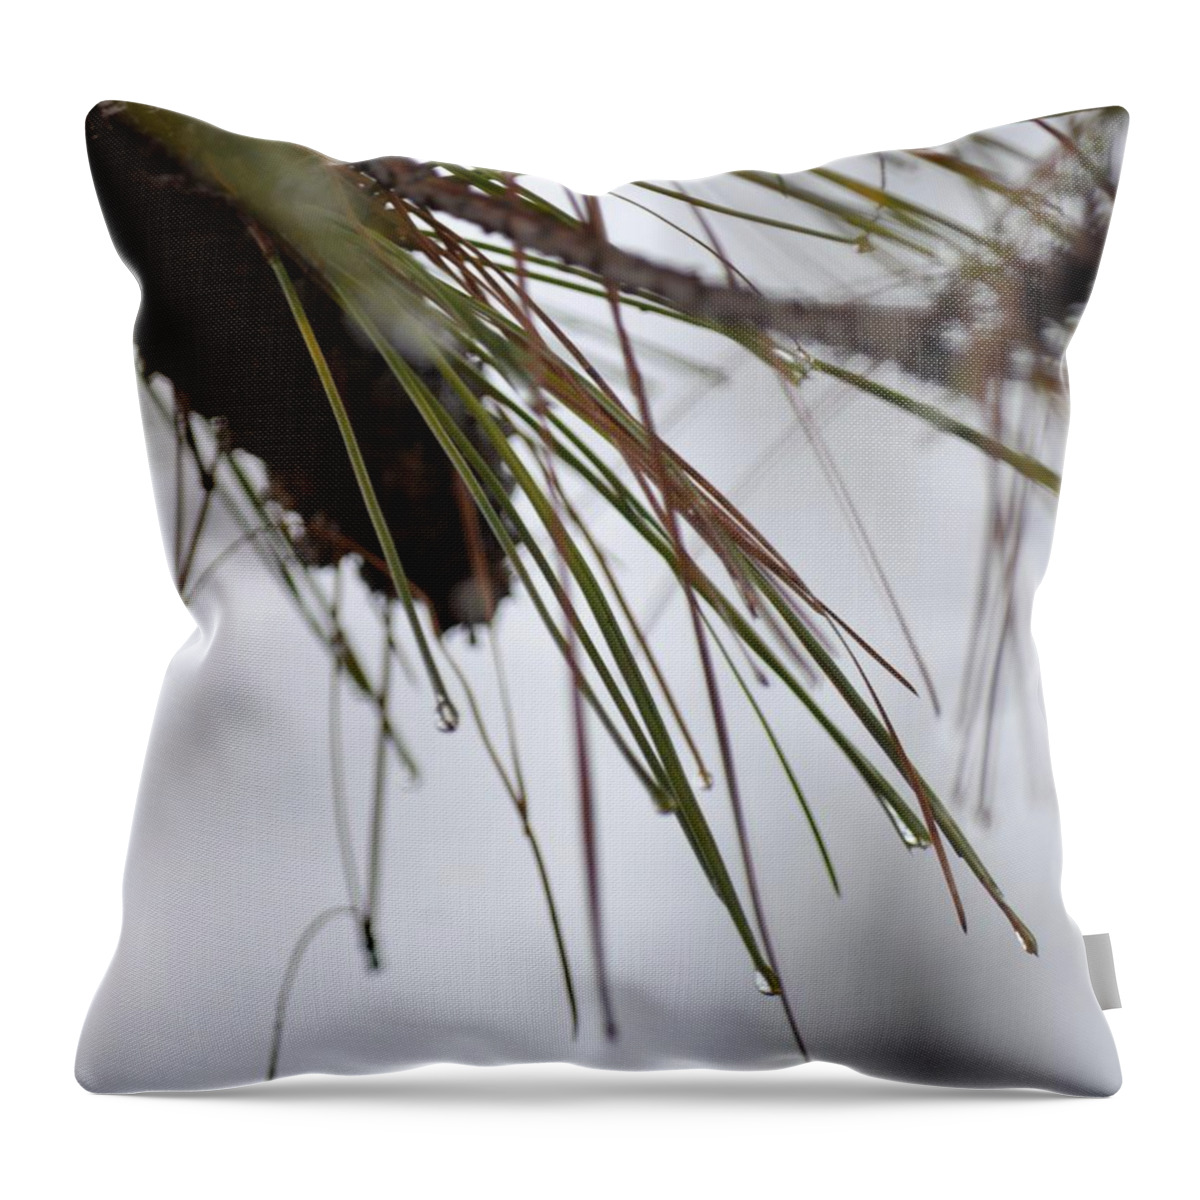 December's Raindrops Throw Pillow featuring the photograph December's Raindrops by Maria Urso